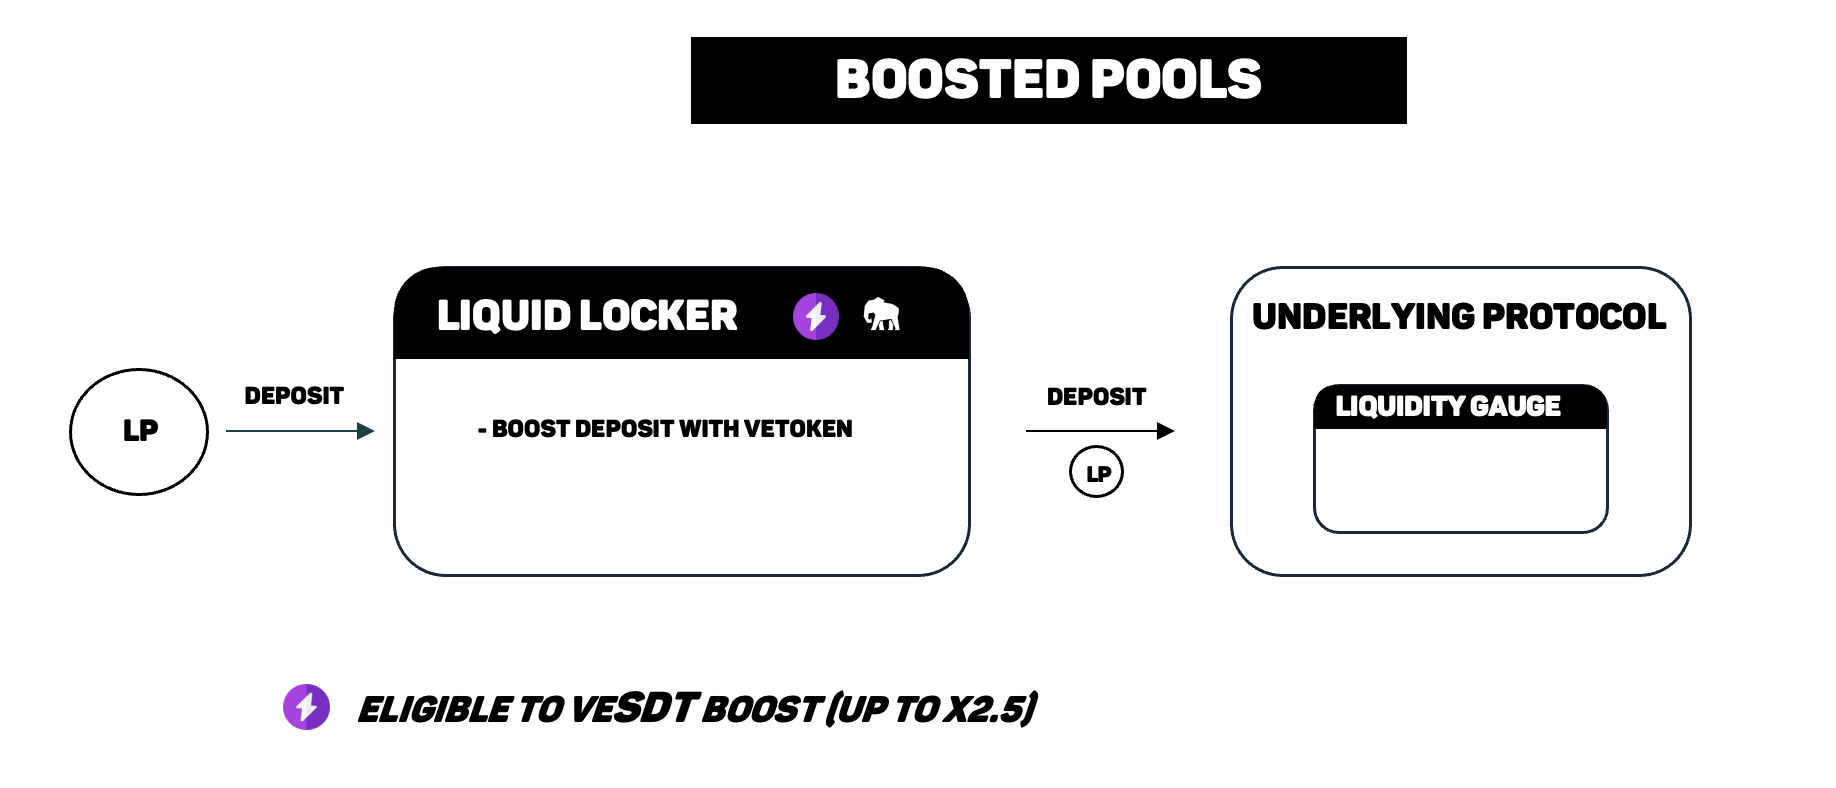 Boosted pools